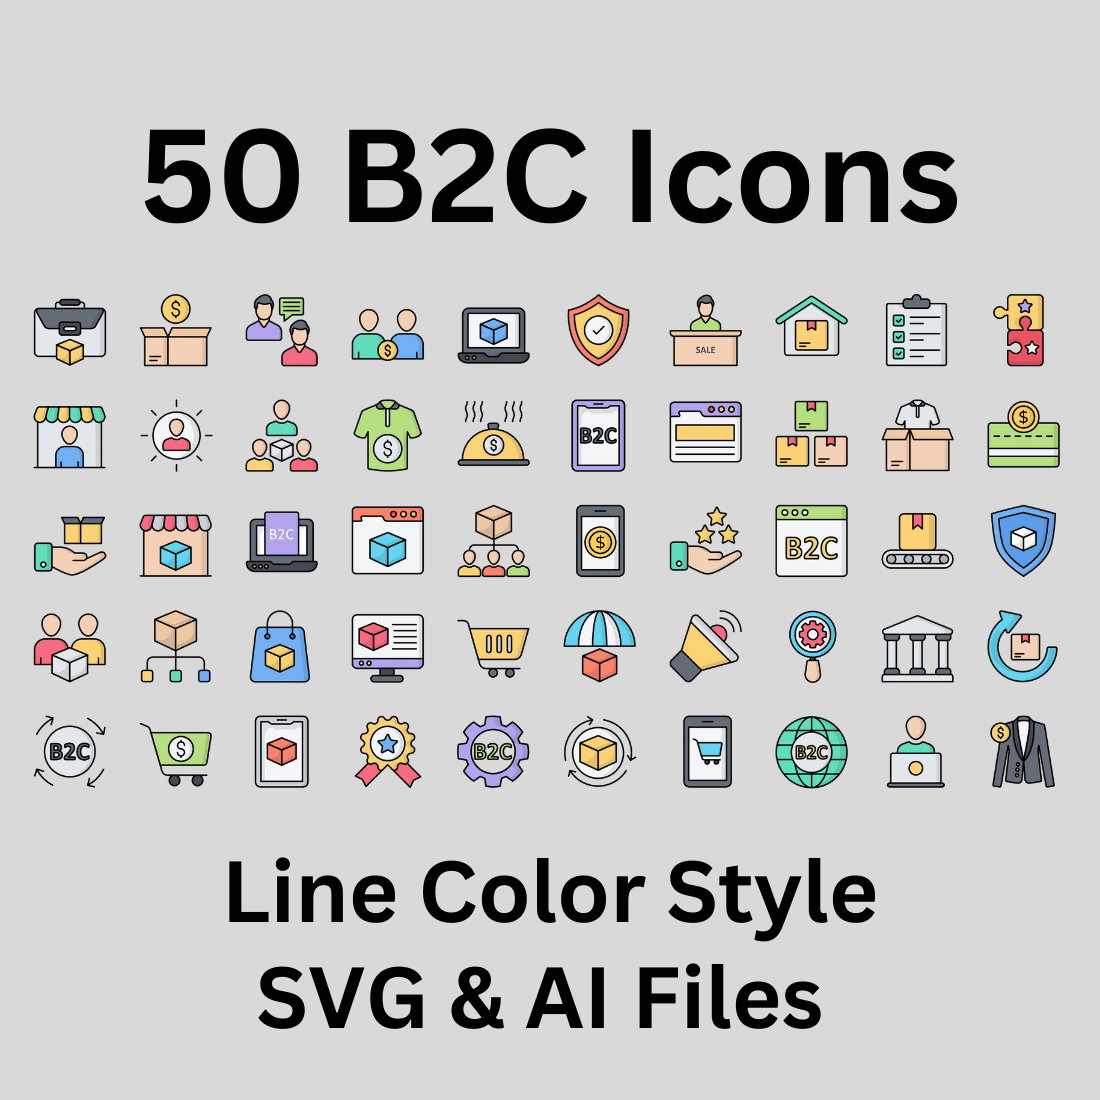 B2C Icon Set 50 Line Color Icons - SVG And AI Files preview image.